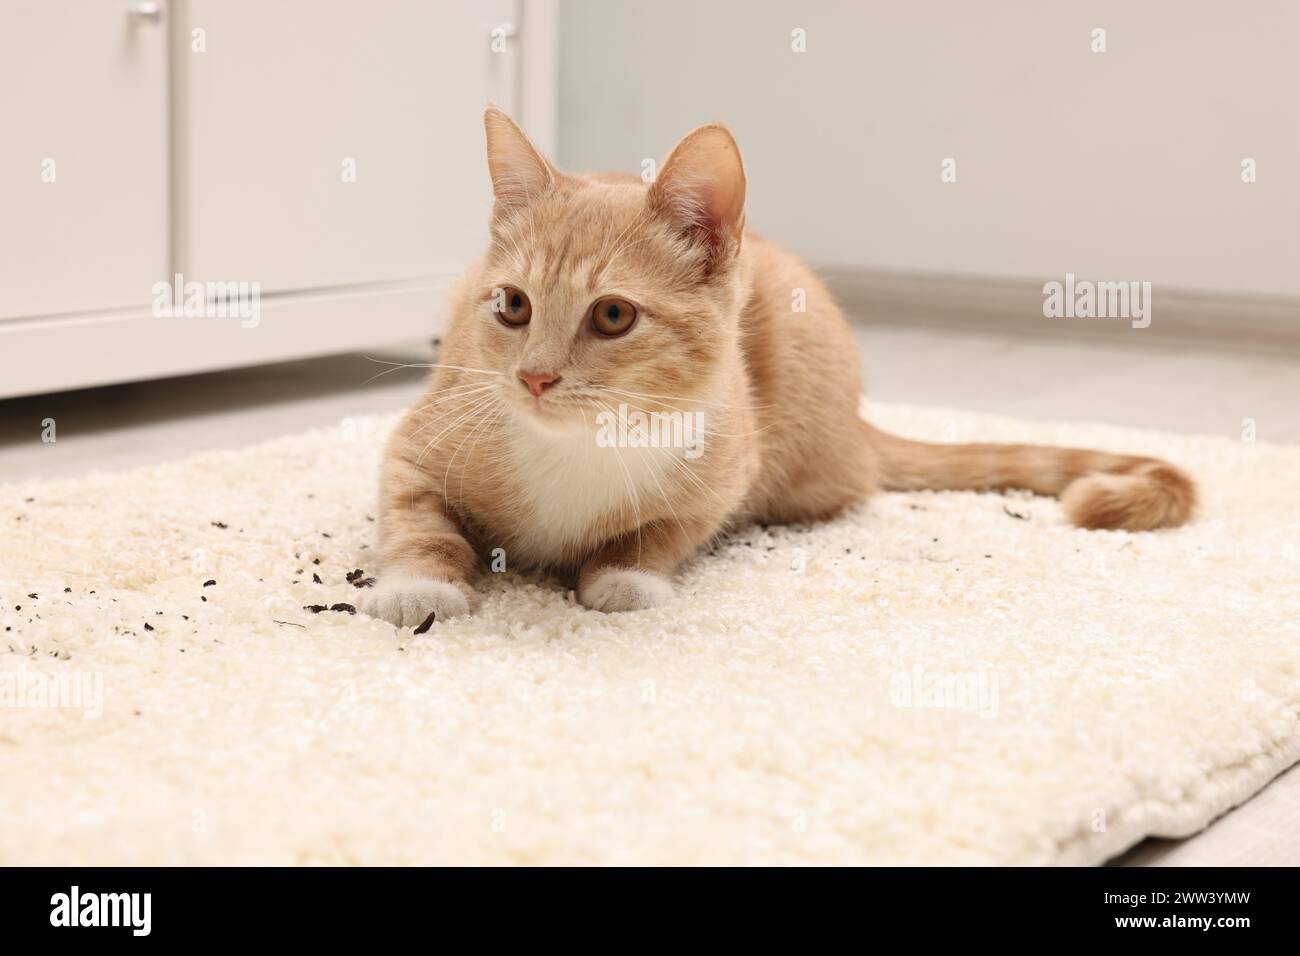 Cute ginger cat on carpet with scattered soil indoors Stock Photo